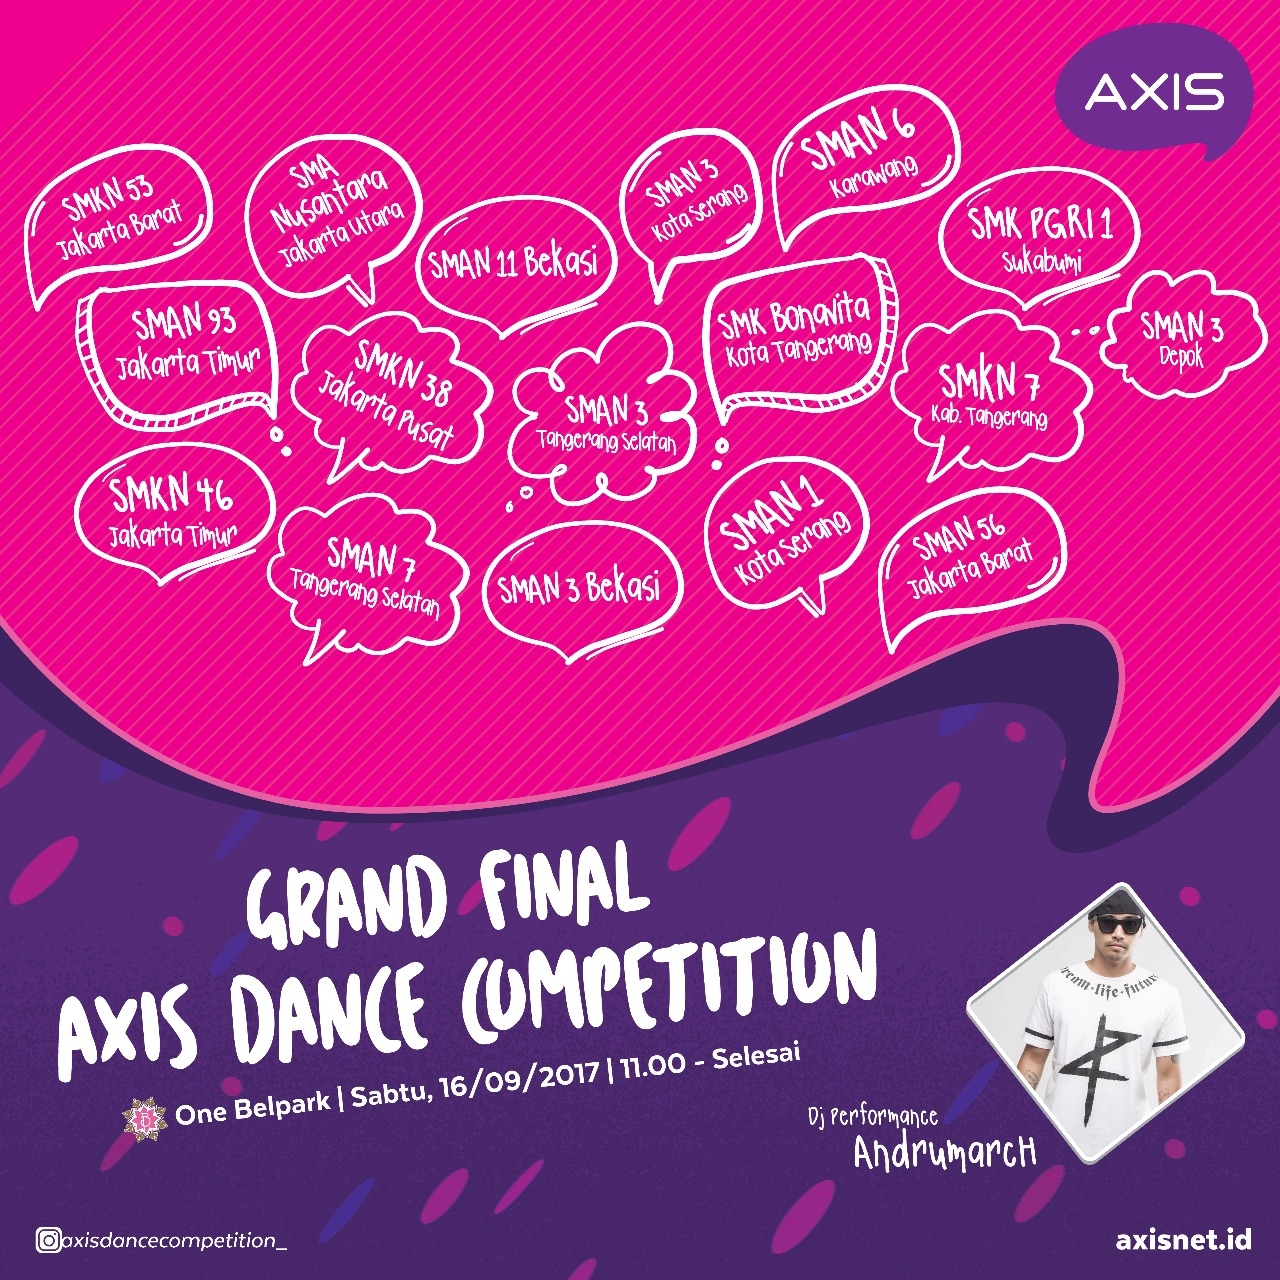 Grand Final AXIS DANCE COMPETITION